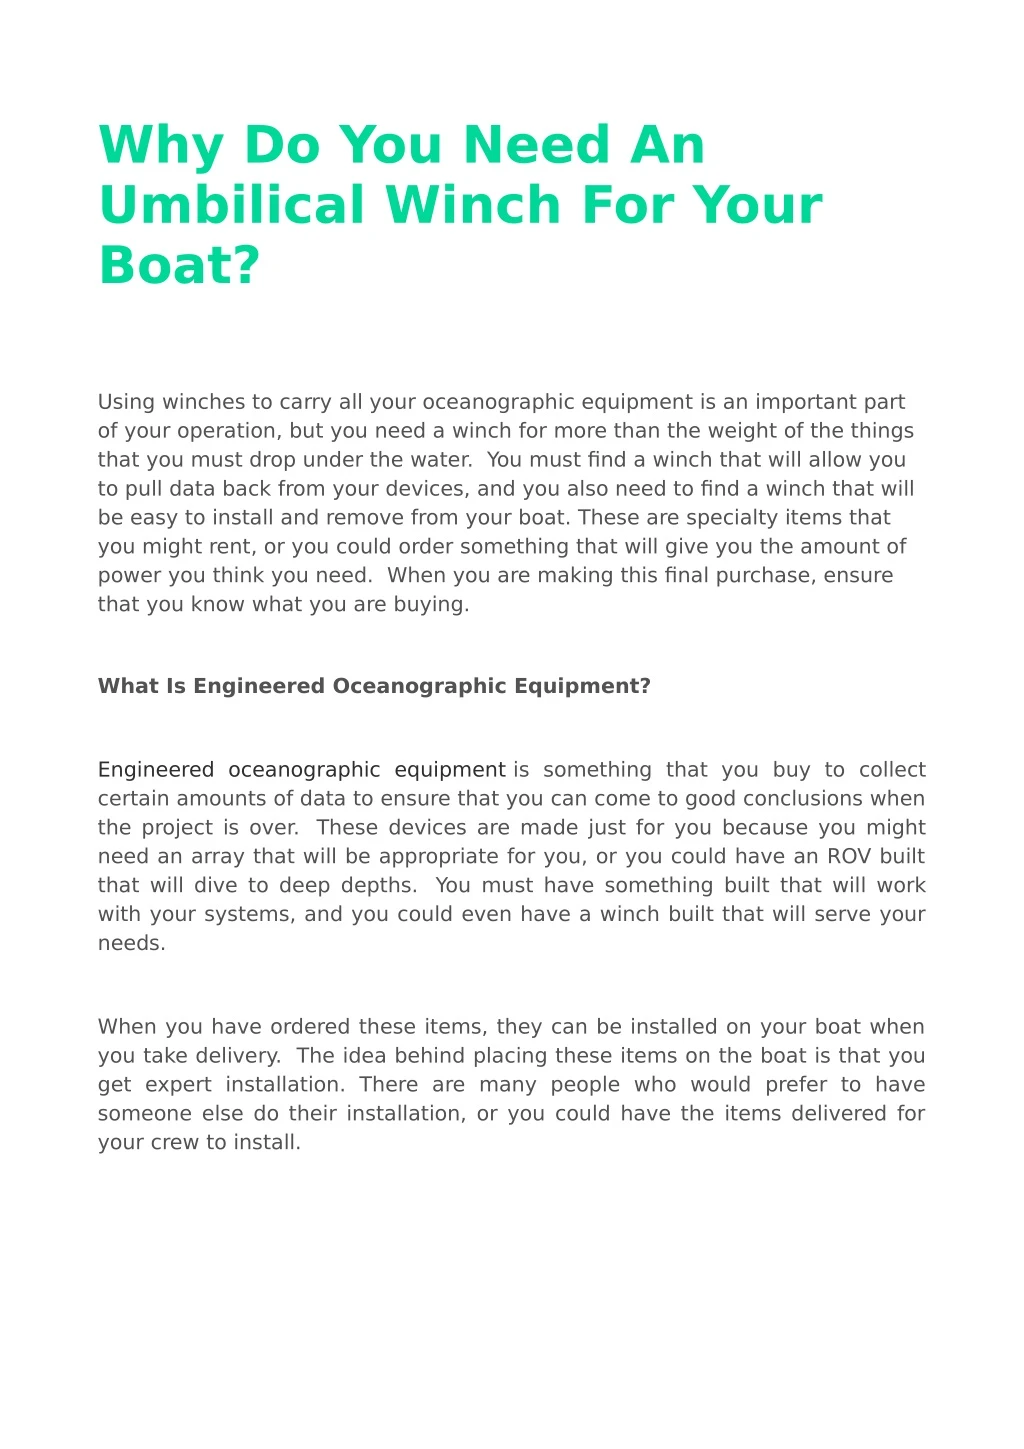 why do you need an umbilical winch for your boat